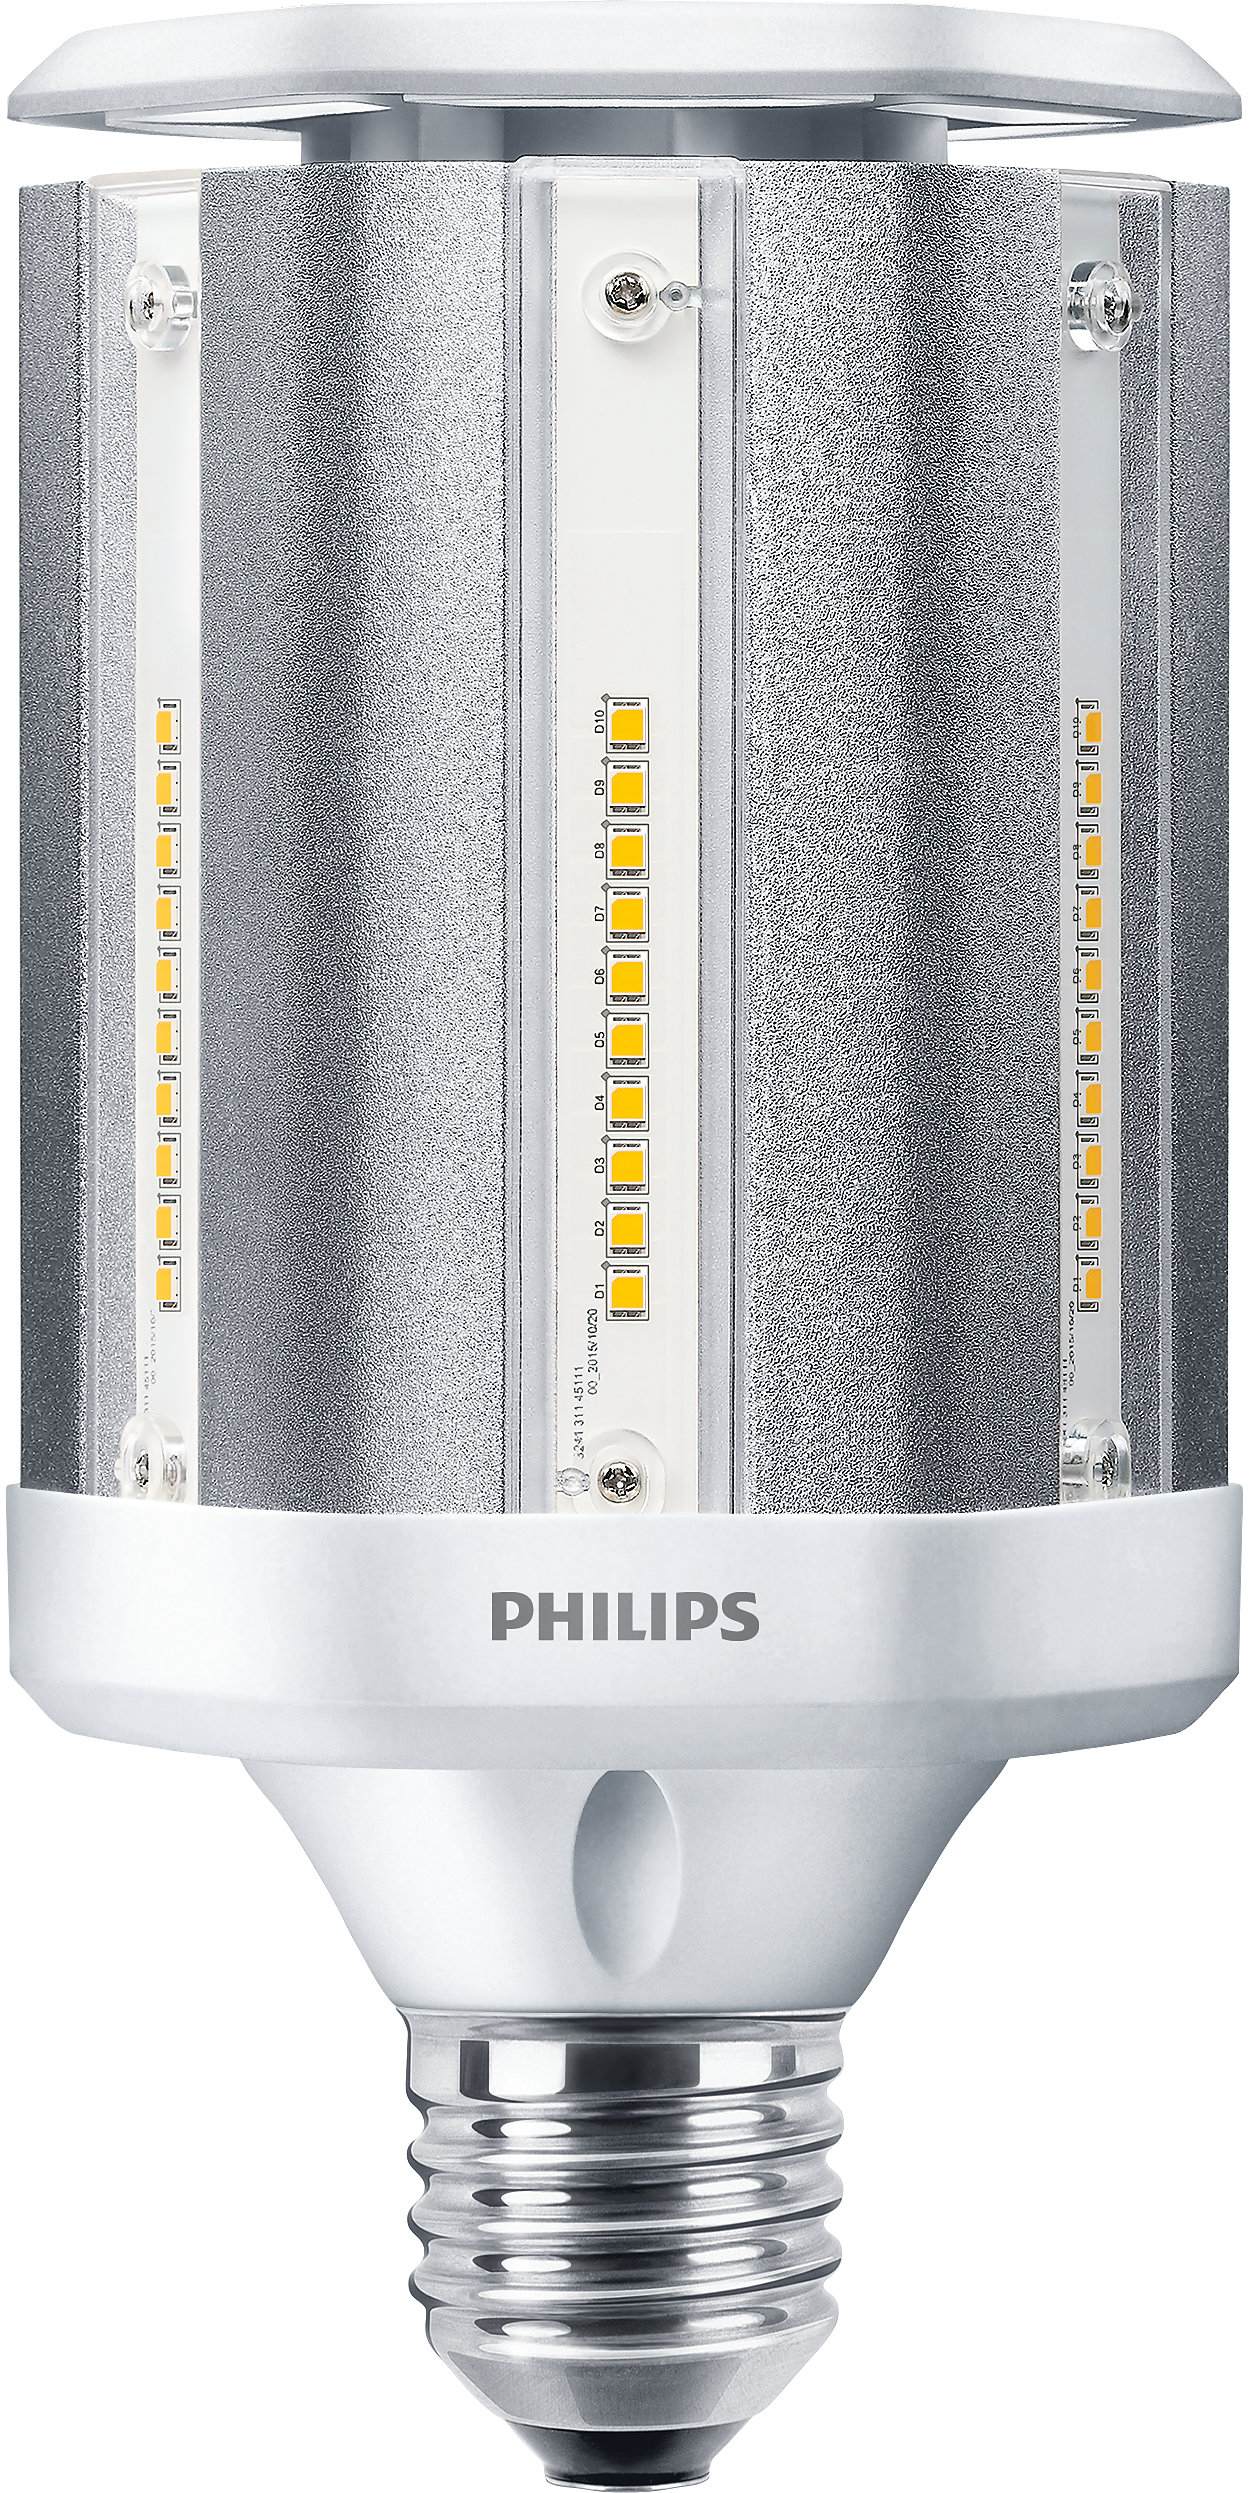 The best LED solution for Post-Top High Intensity Discharge (HID) lamp replacement with low initial investment